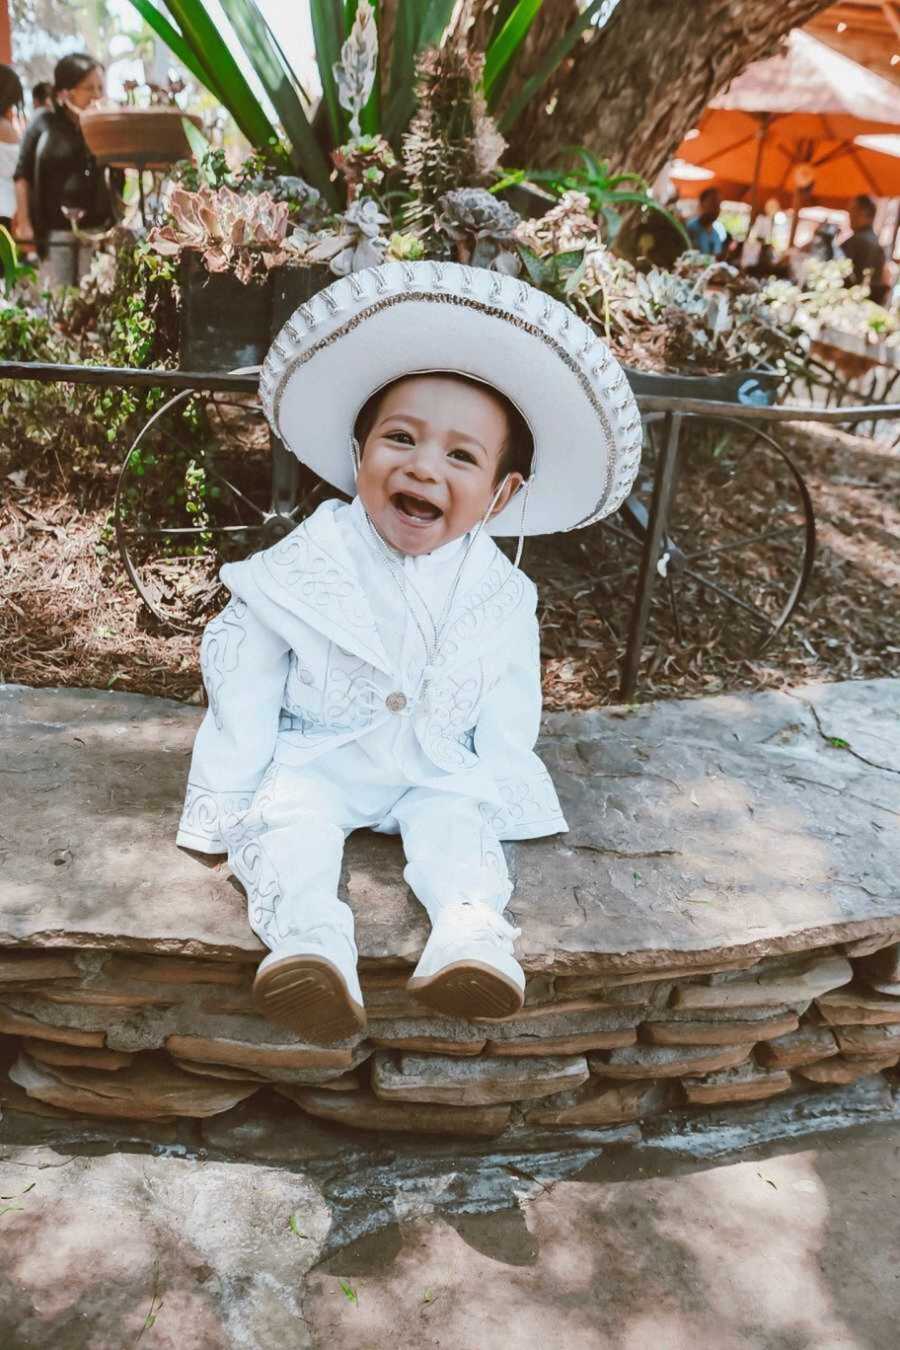 Infant wearing white sombrero and traditional Mexican suit